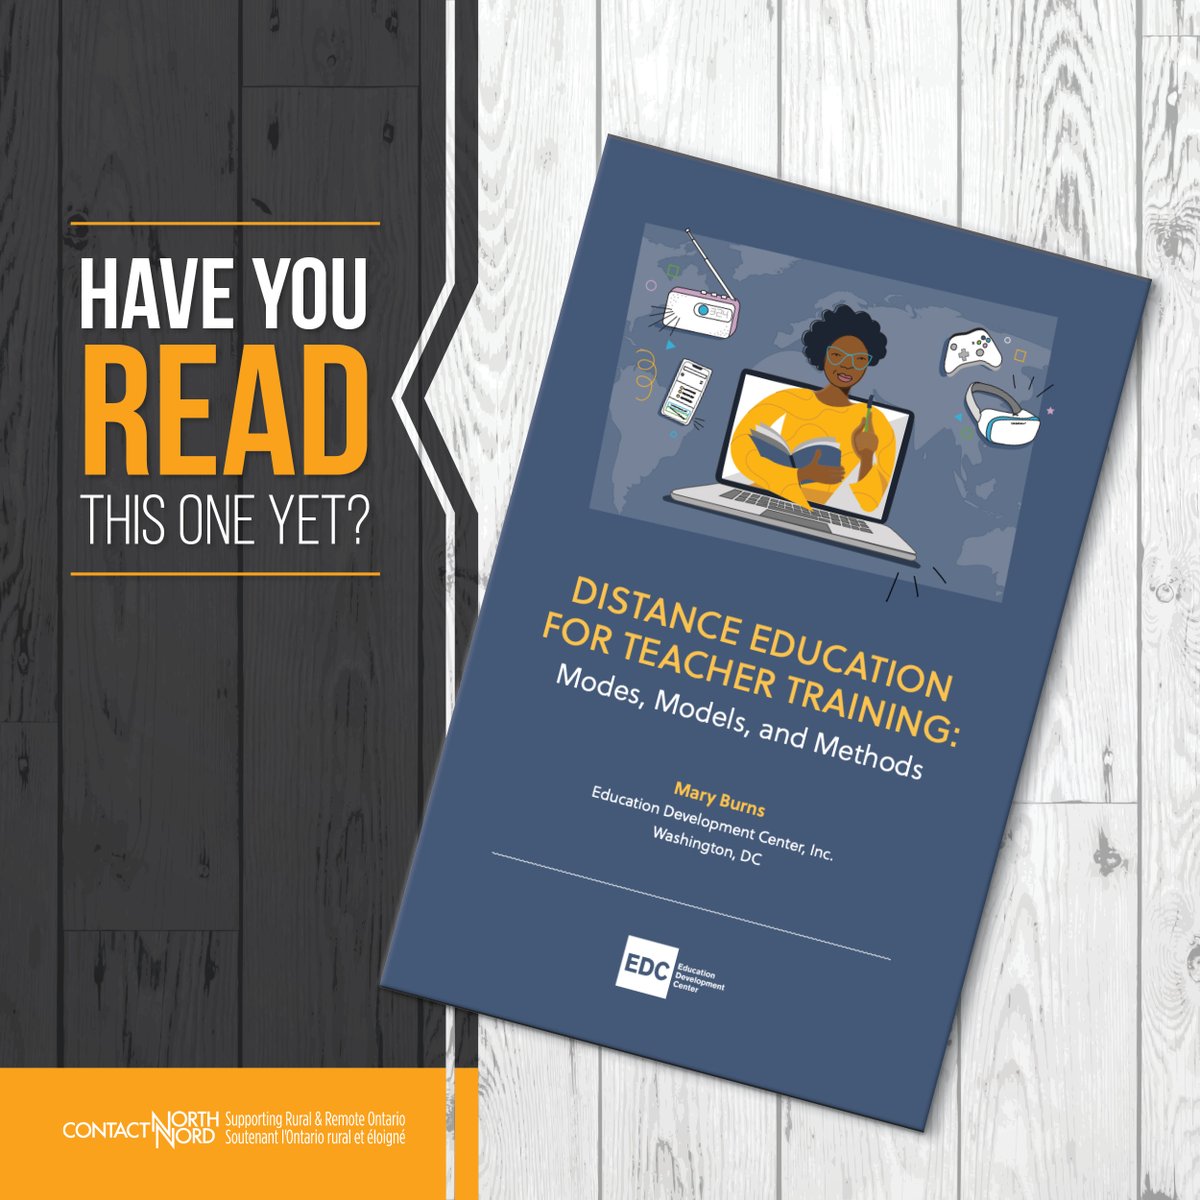 Dive into the updated 'Distance Education for Teacher Training' guide 📚💻 (free PDF). From past lessons to the COVID-19 impact, get insights on effective distance learning for educators 🍎🌐. contactnorth.info/DETraining @EDCtweets #Teaching #EdChat #Books